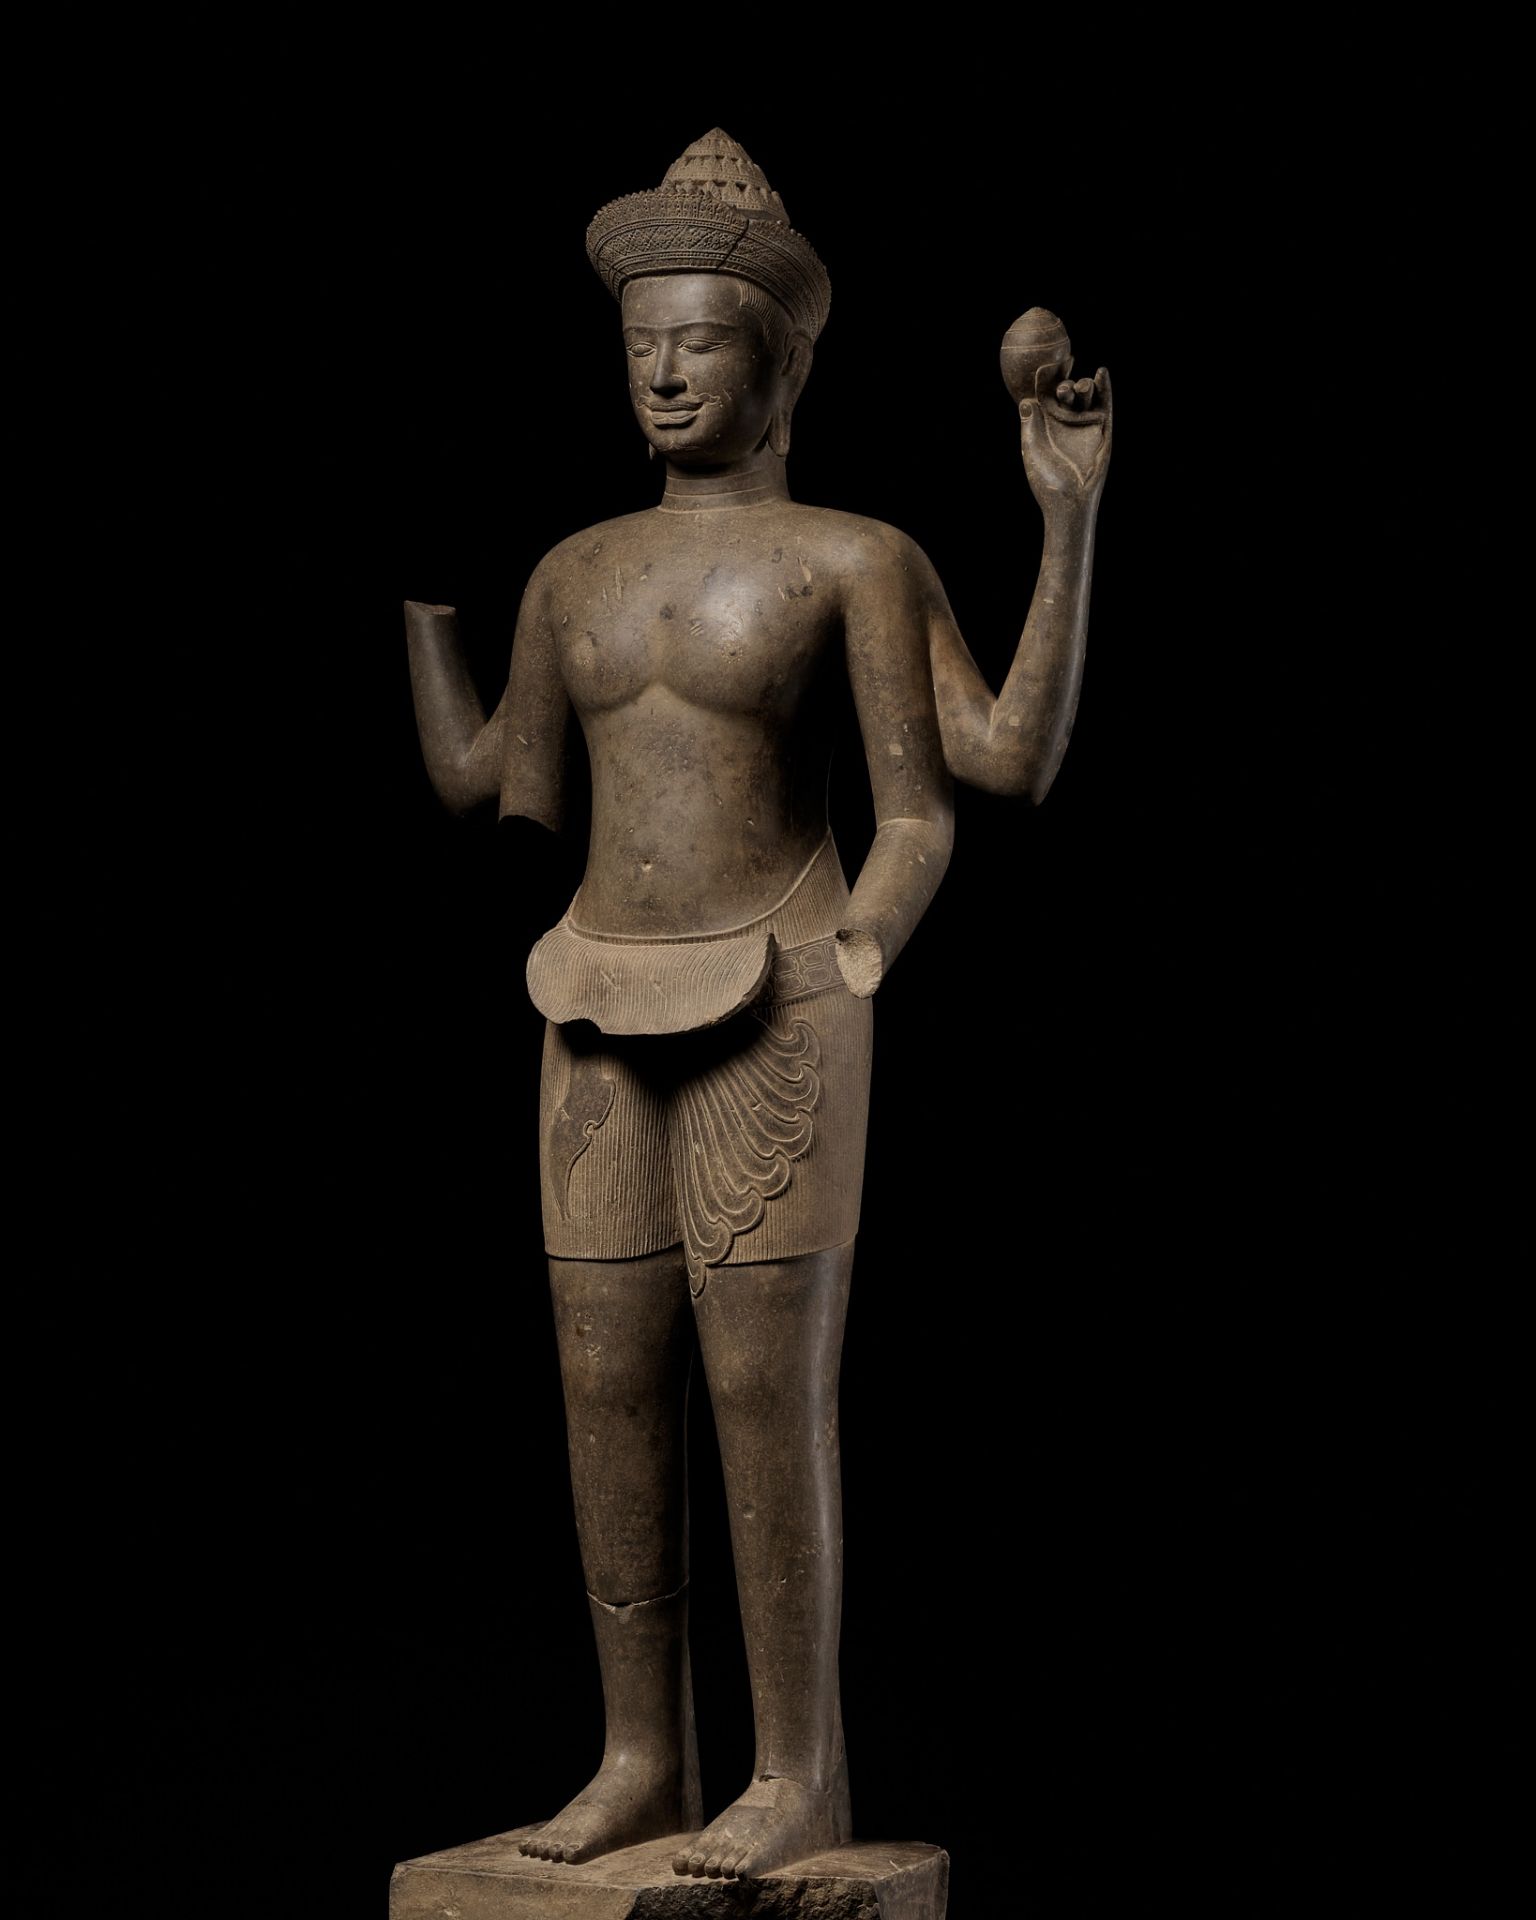 AN EXTREMELY RARE AND MONUMENTAL SANDSTONE STATUE OF VISHNU, ANGKOR PERIOD